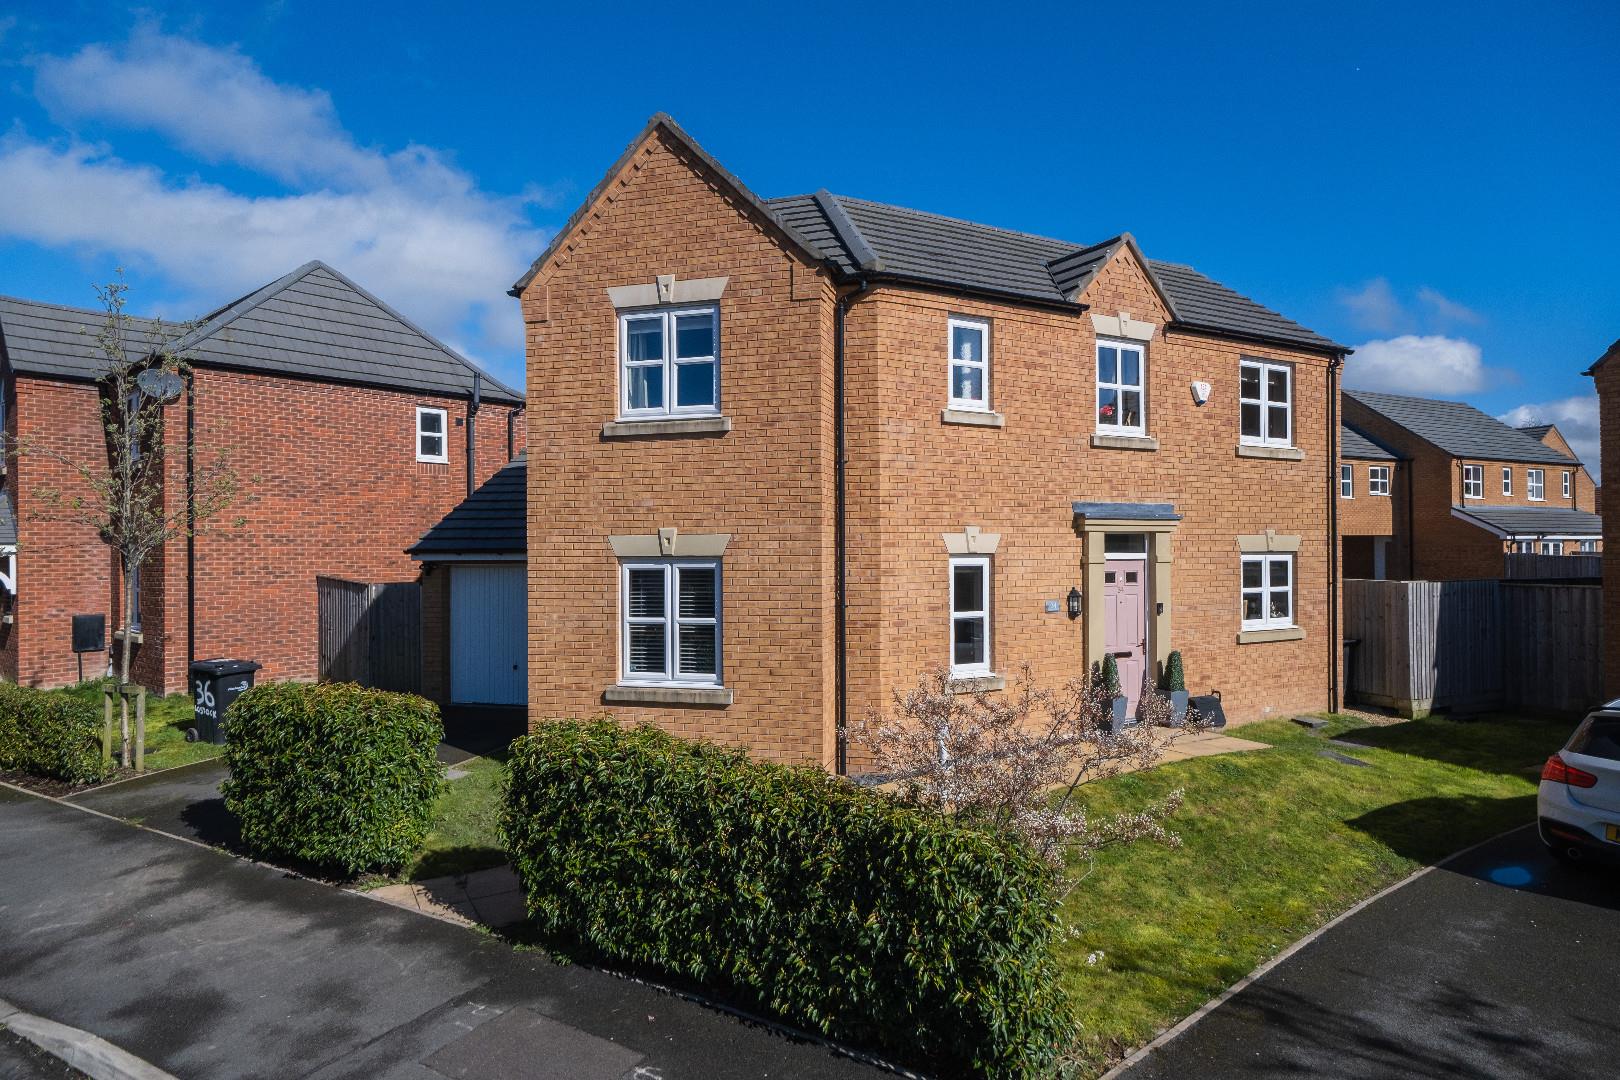 3 bedroom  Detached House for Sale in Middlewich